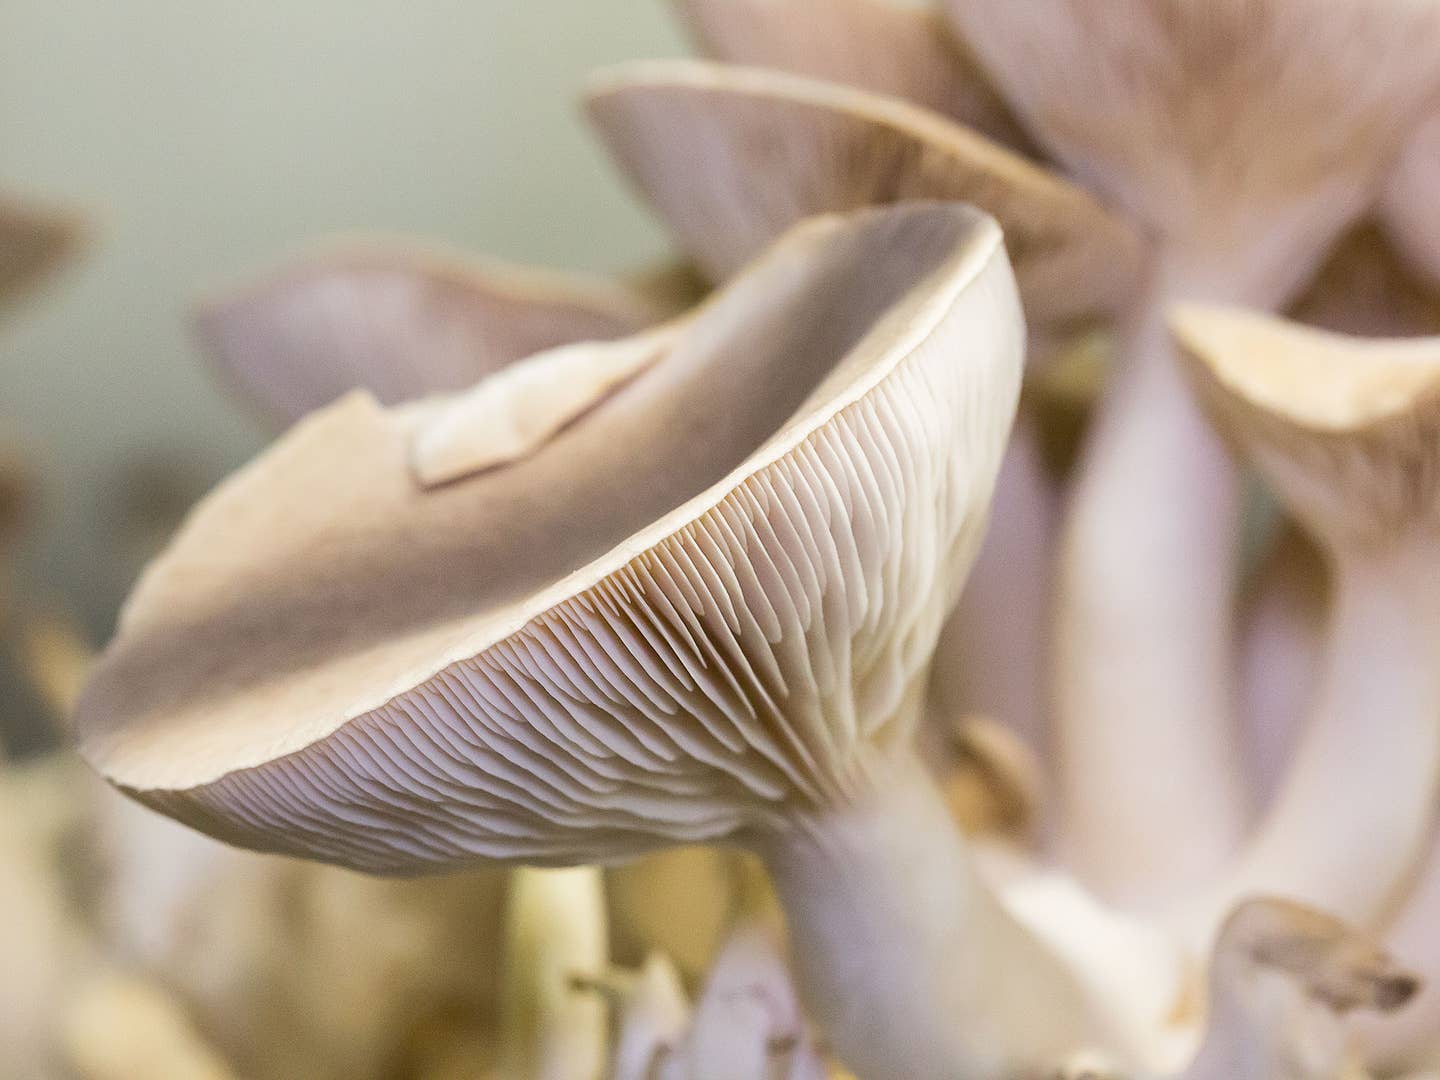 A Trip to the Alien Planet That Grows America’s Mushrooms